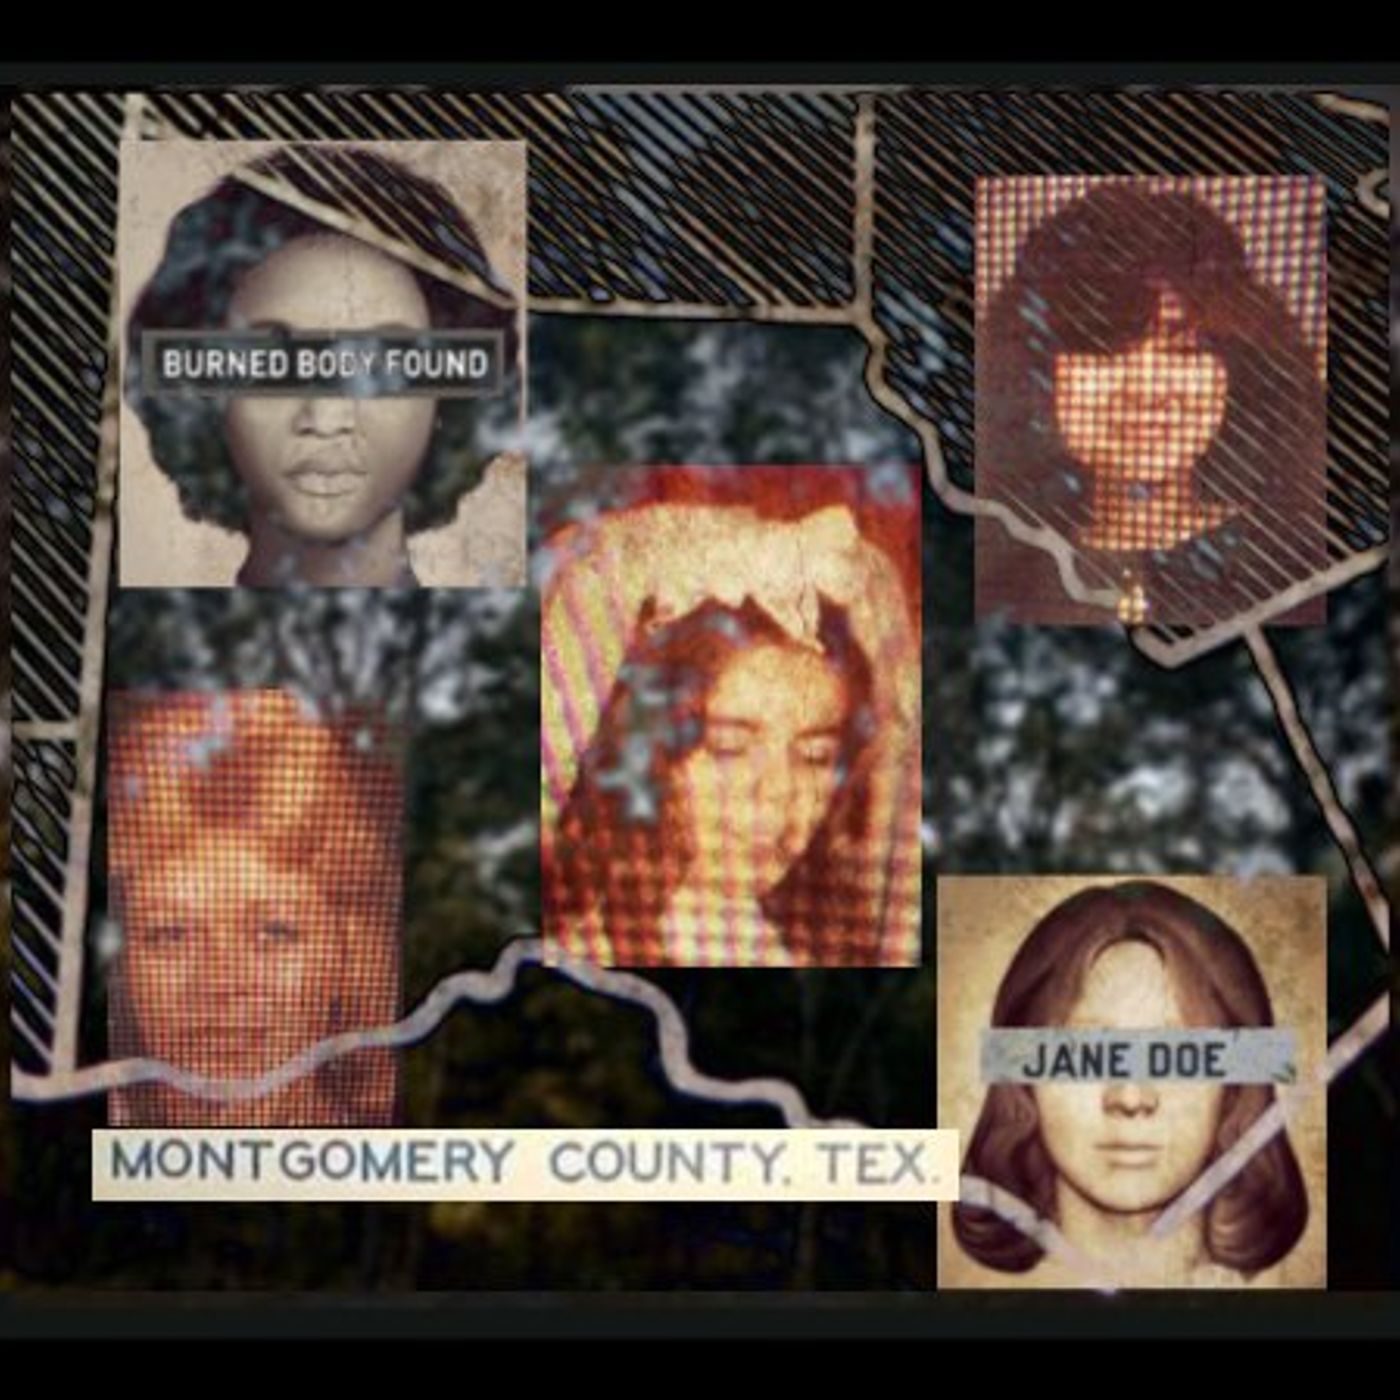 The Killing Fields of Montgomery County